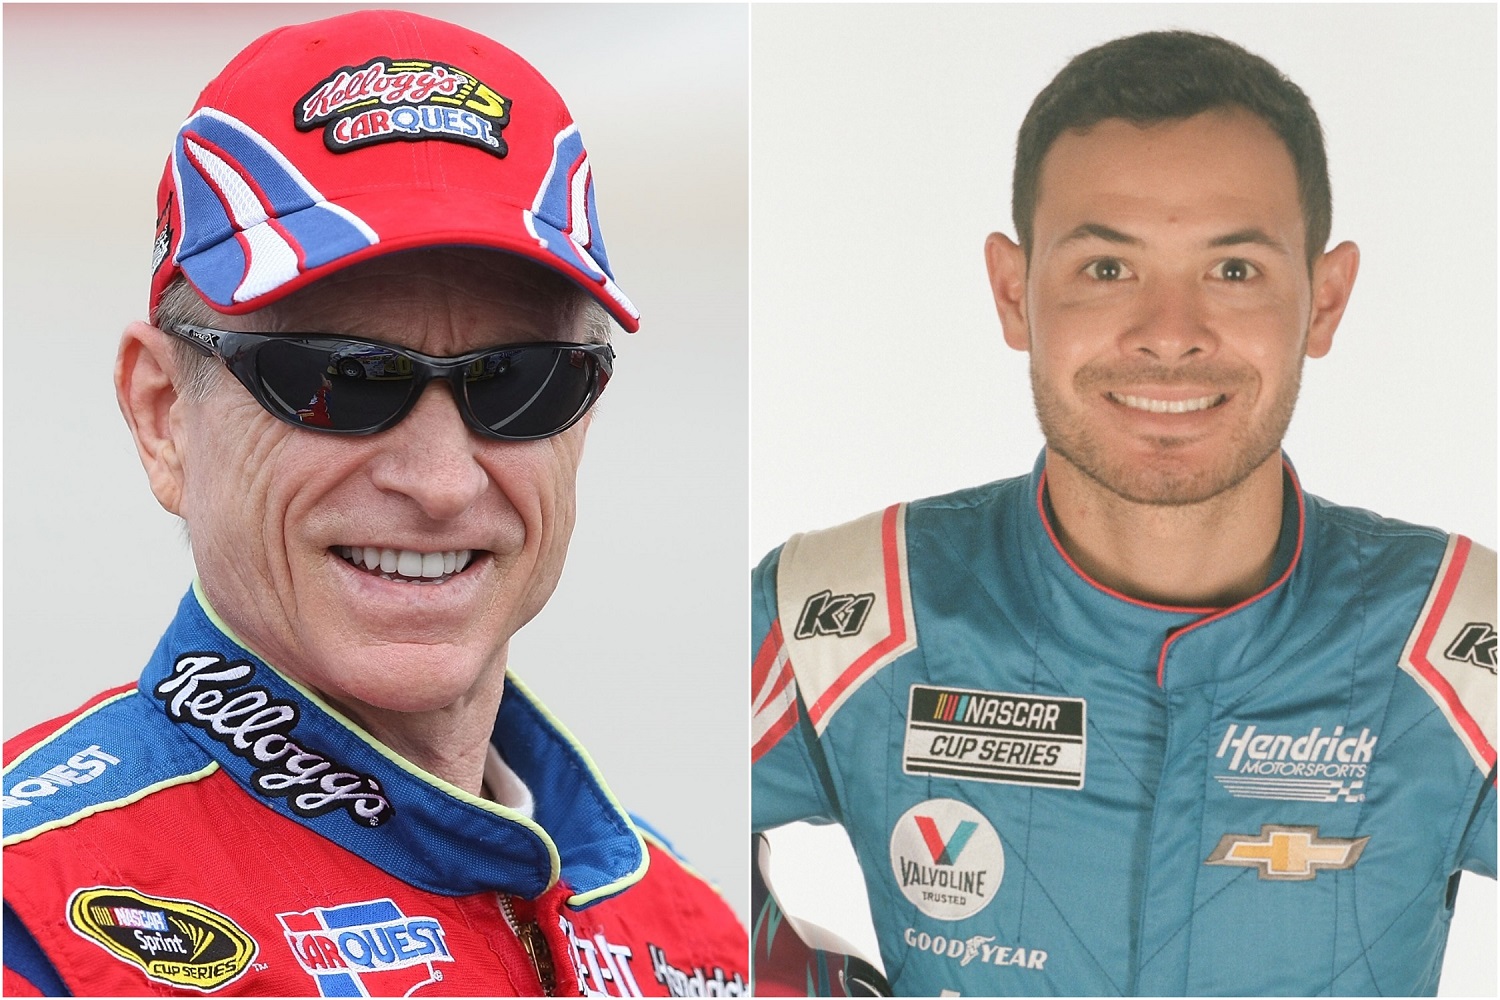 Mark Martin and Kyle Larson have both driven the No. 5 Chevy for Hendrick Motorsports and scored impressive success.